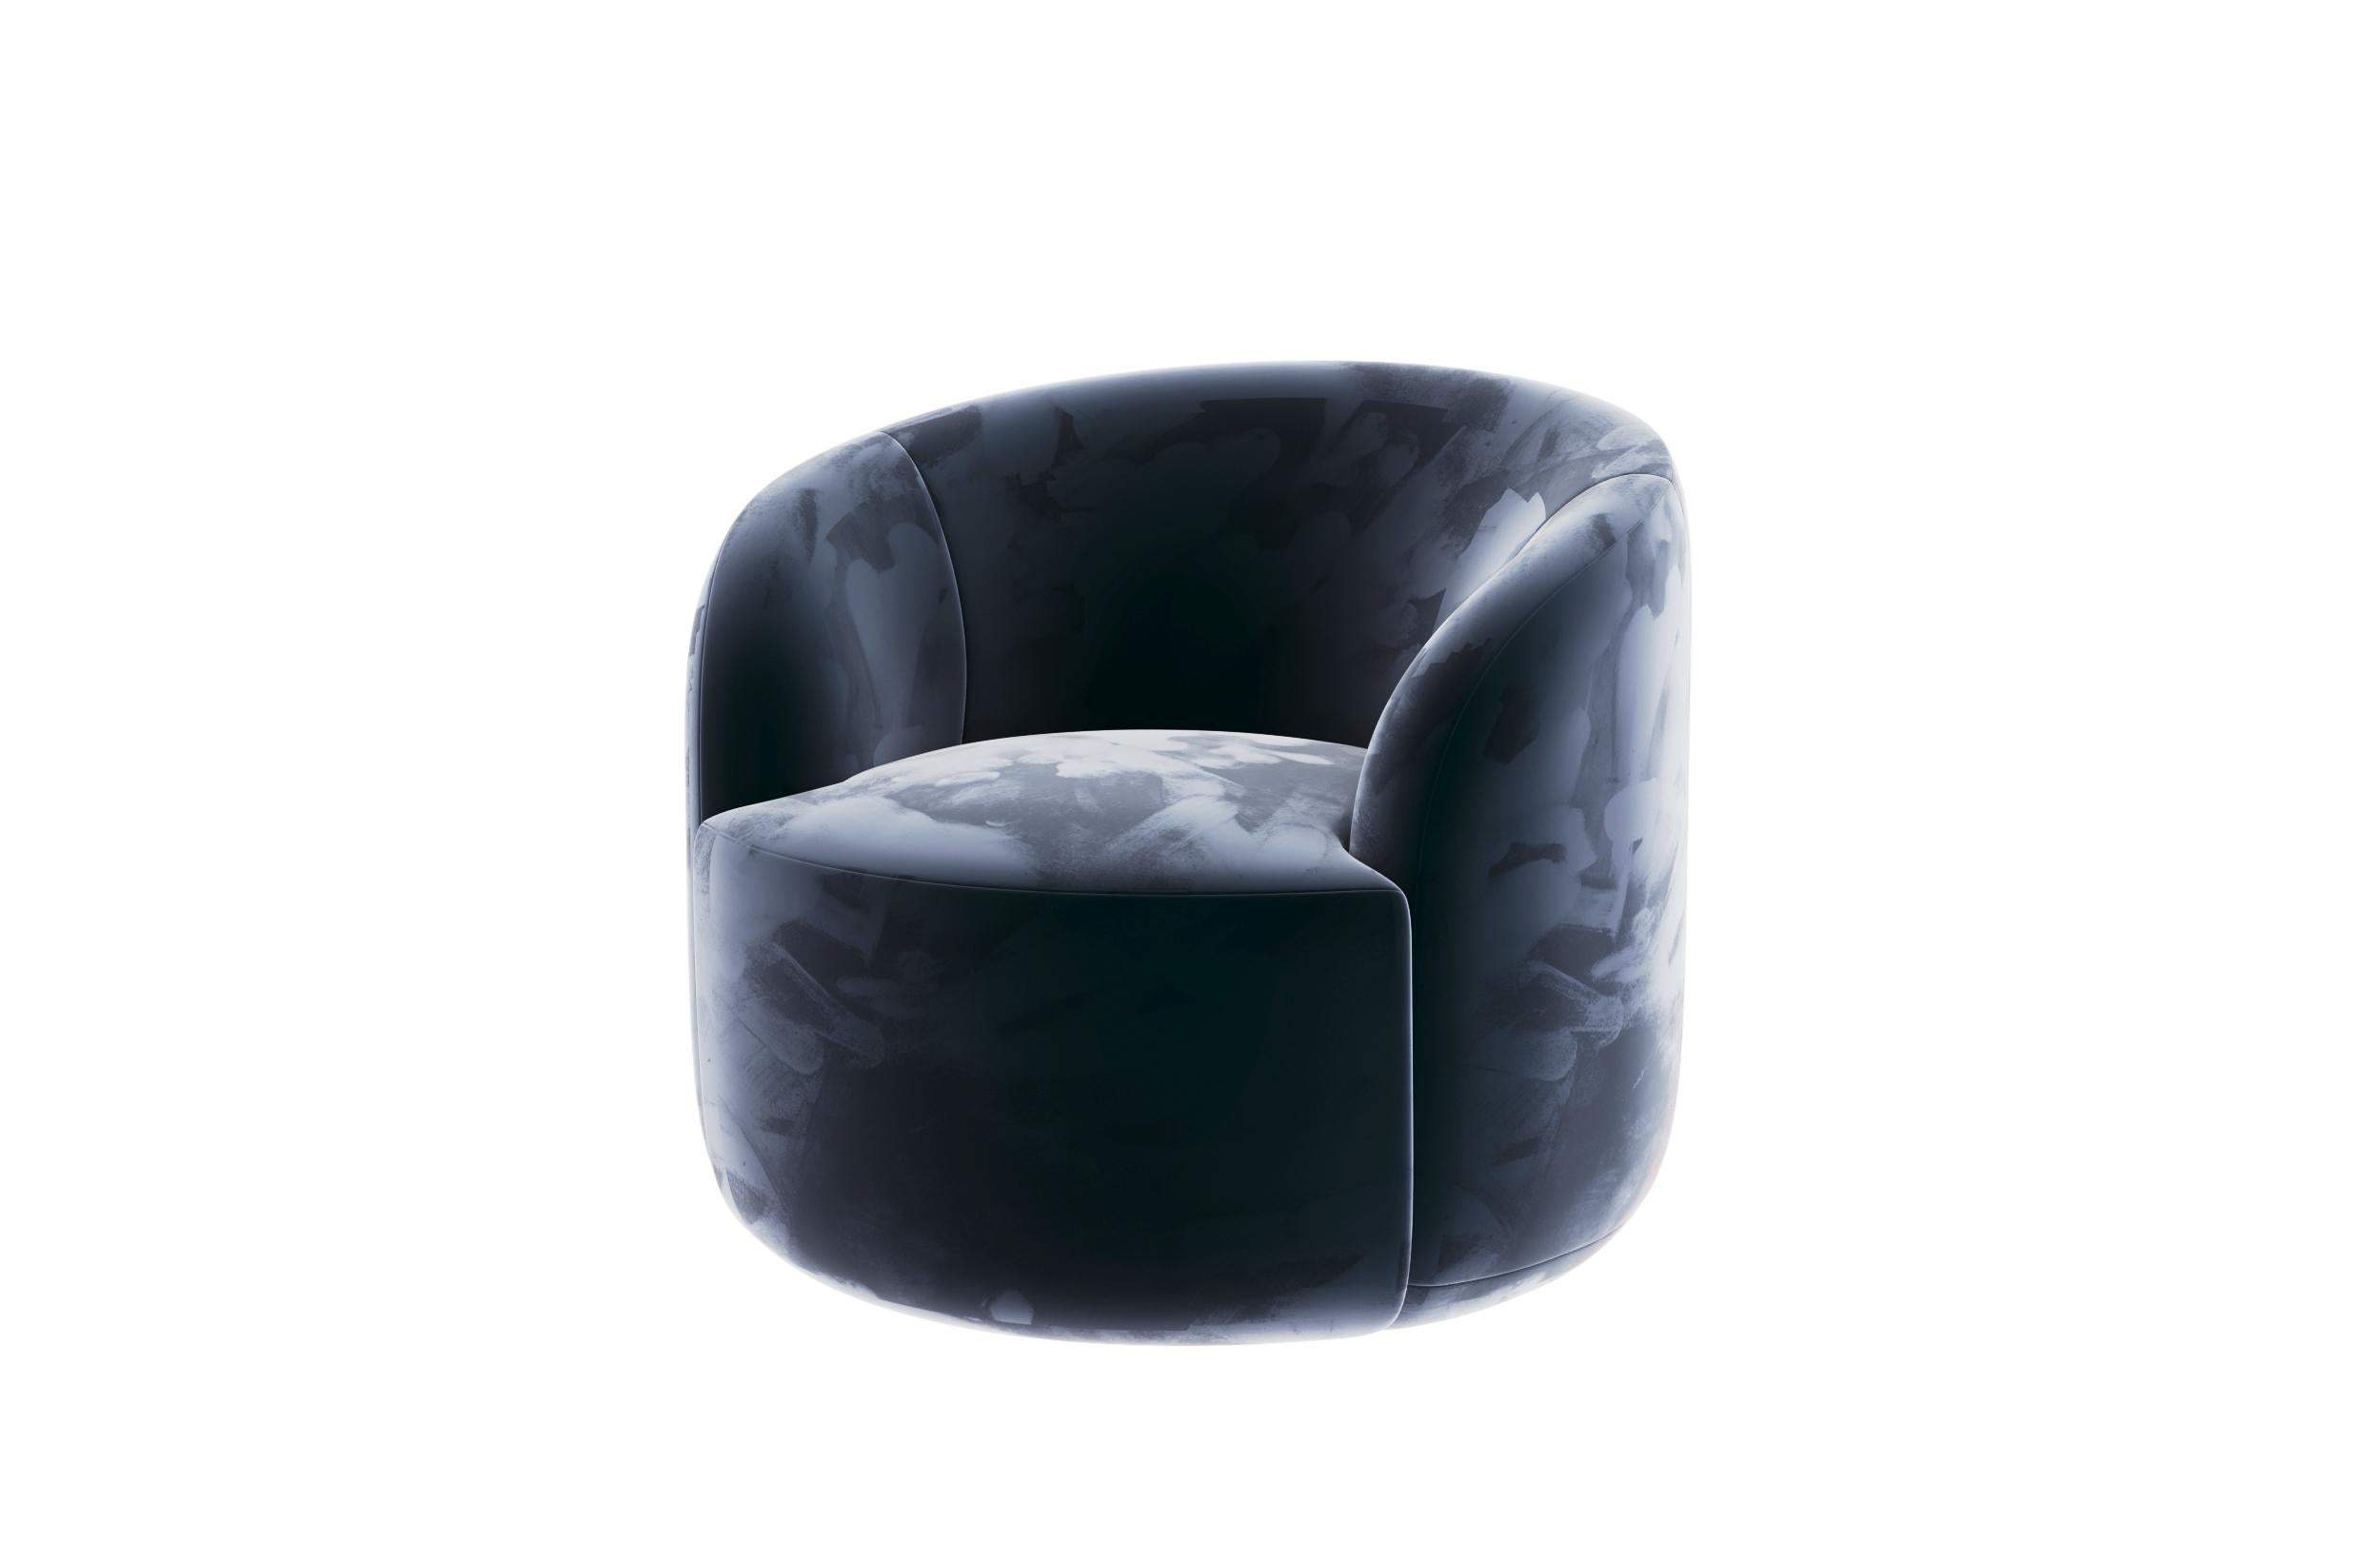 The rounded, curved shape, is crafted into the unique and original design of this well-proportioned and visually distinctive sofa series, available in custom sizes, ensuring intimacy and convivial socialization in any interior. Upholstery in your